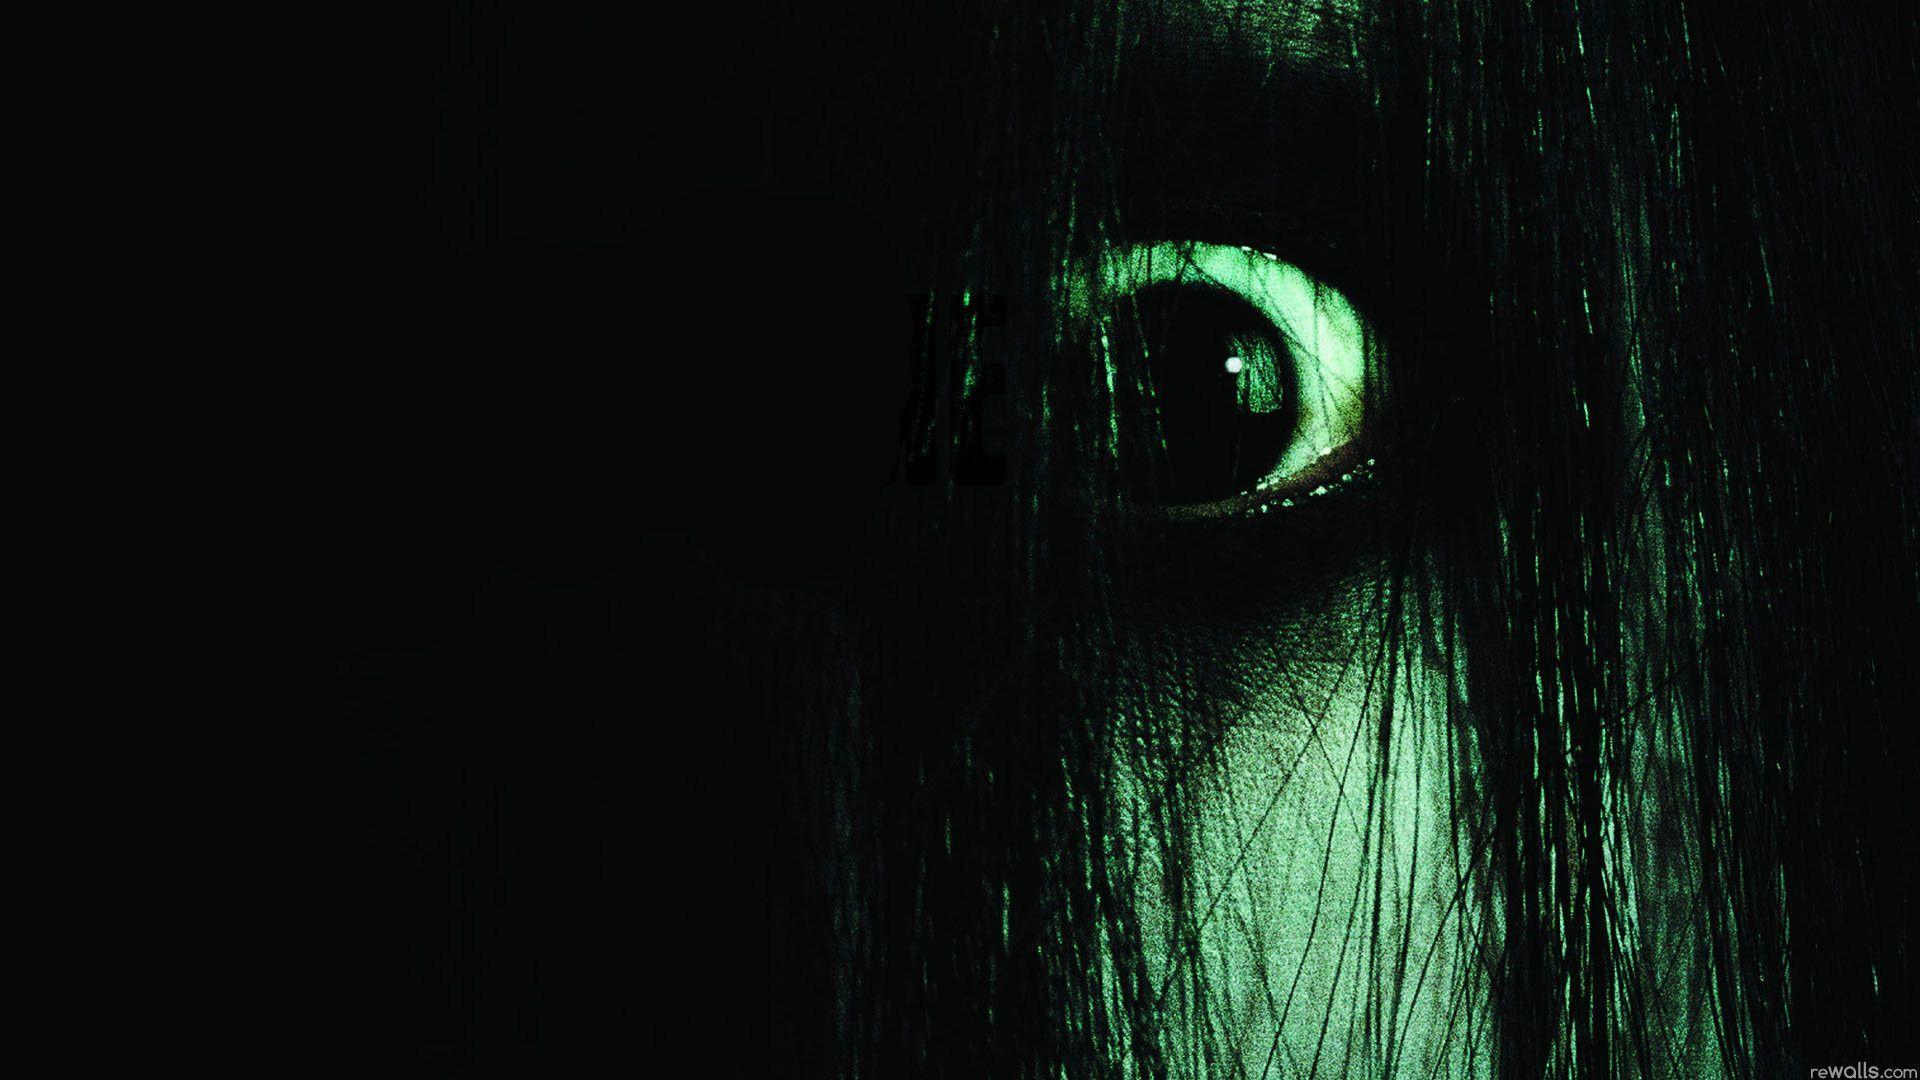 Free Scary Wallpaper For Desktop. Scary wallpaper, Scary background, Scary image